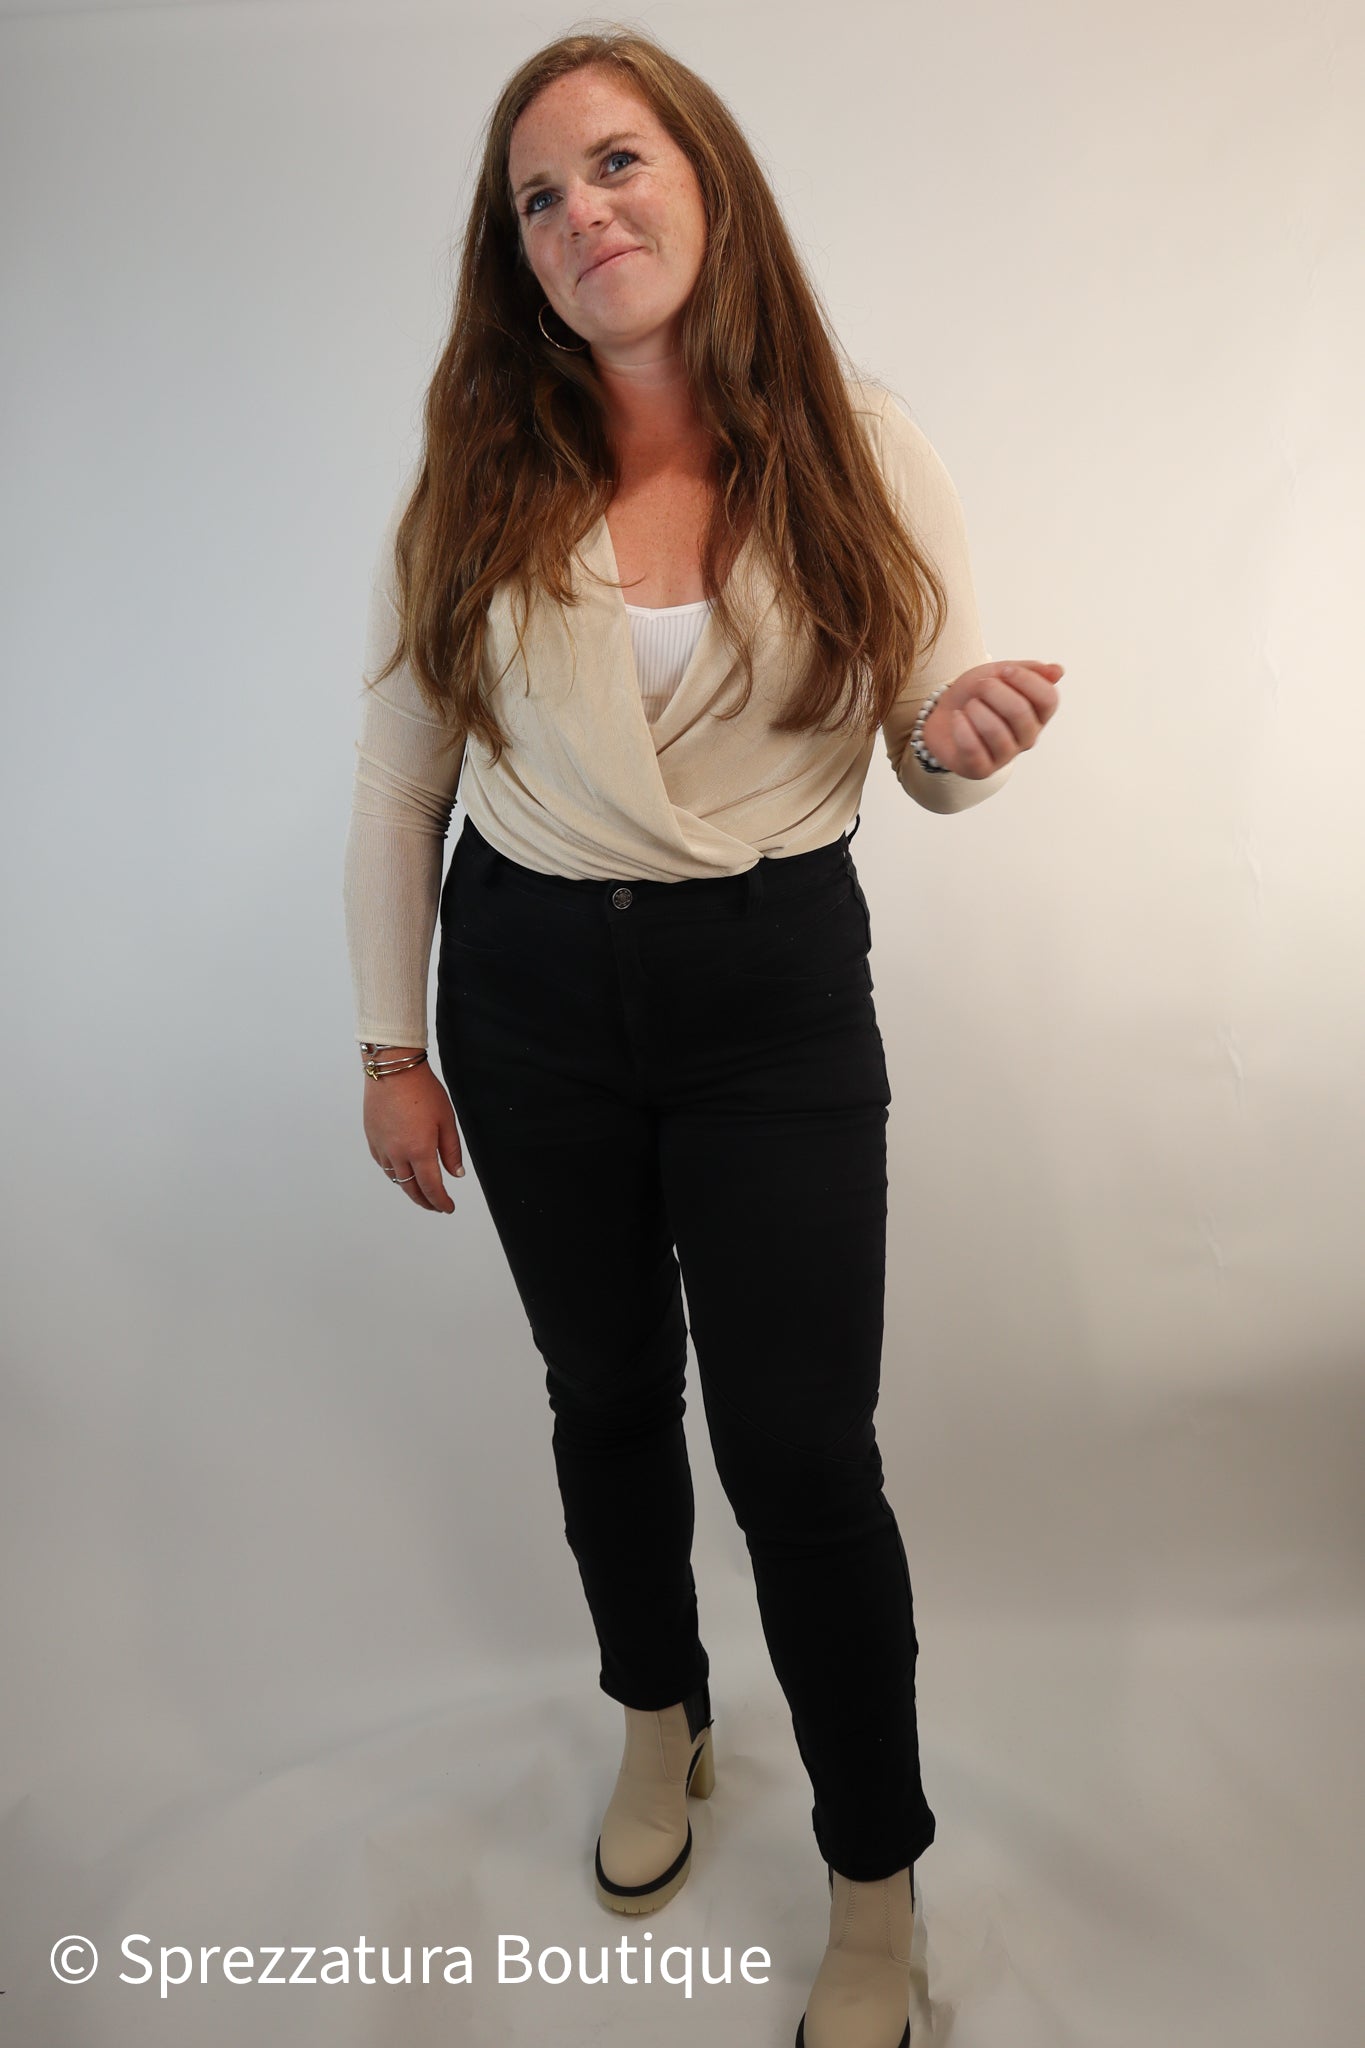 Black twill detailed motto style pants trousers. Professional work women's outfit fall winter style slight flare cropped length. Autumn style black pants. Modern smart causal female chic effortless outfit womens ladies gift elegant effortless clothing clothes apparel outfits chic summer style women’s boutique trendy fall back to school teacher office jeans stretchy